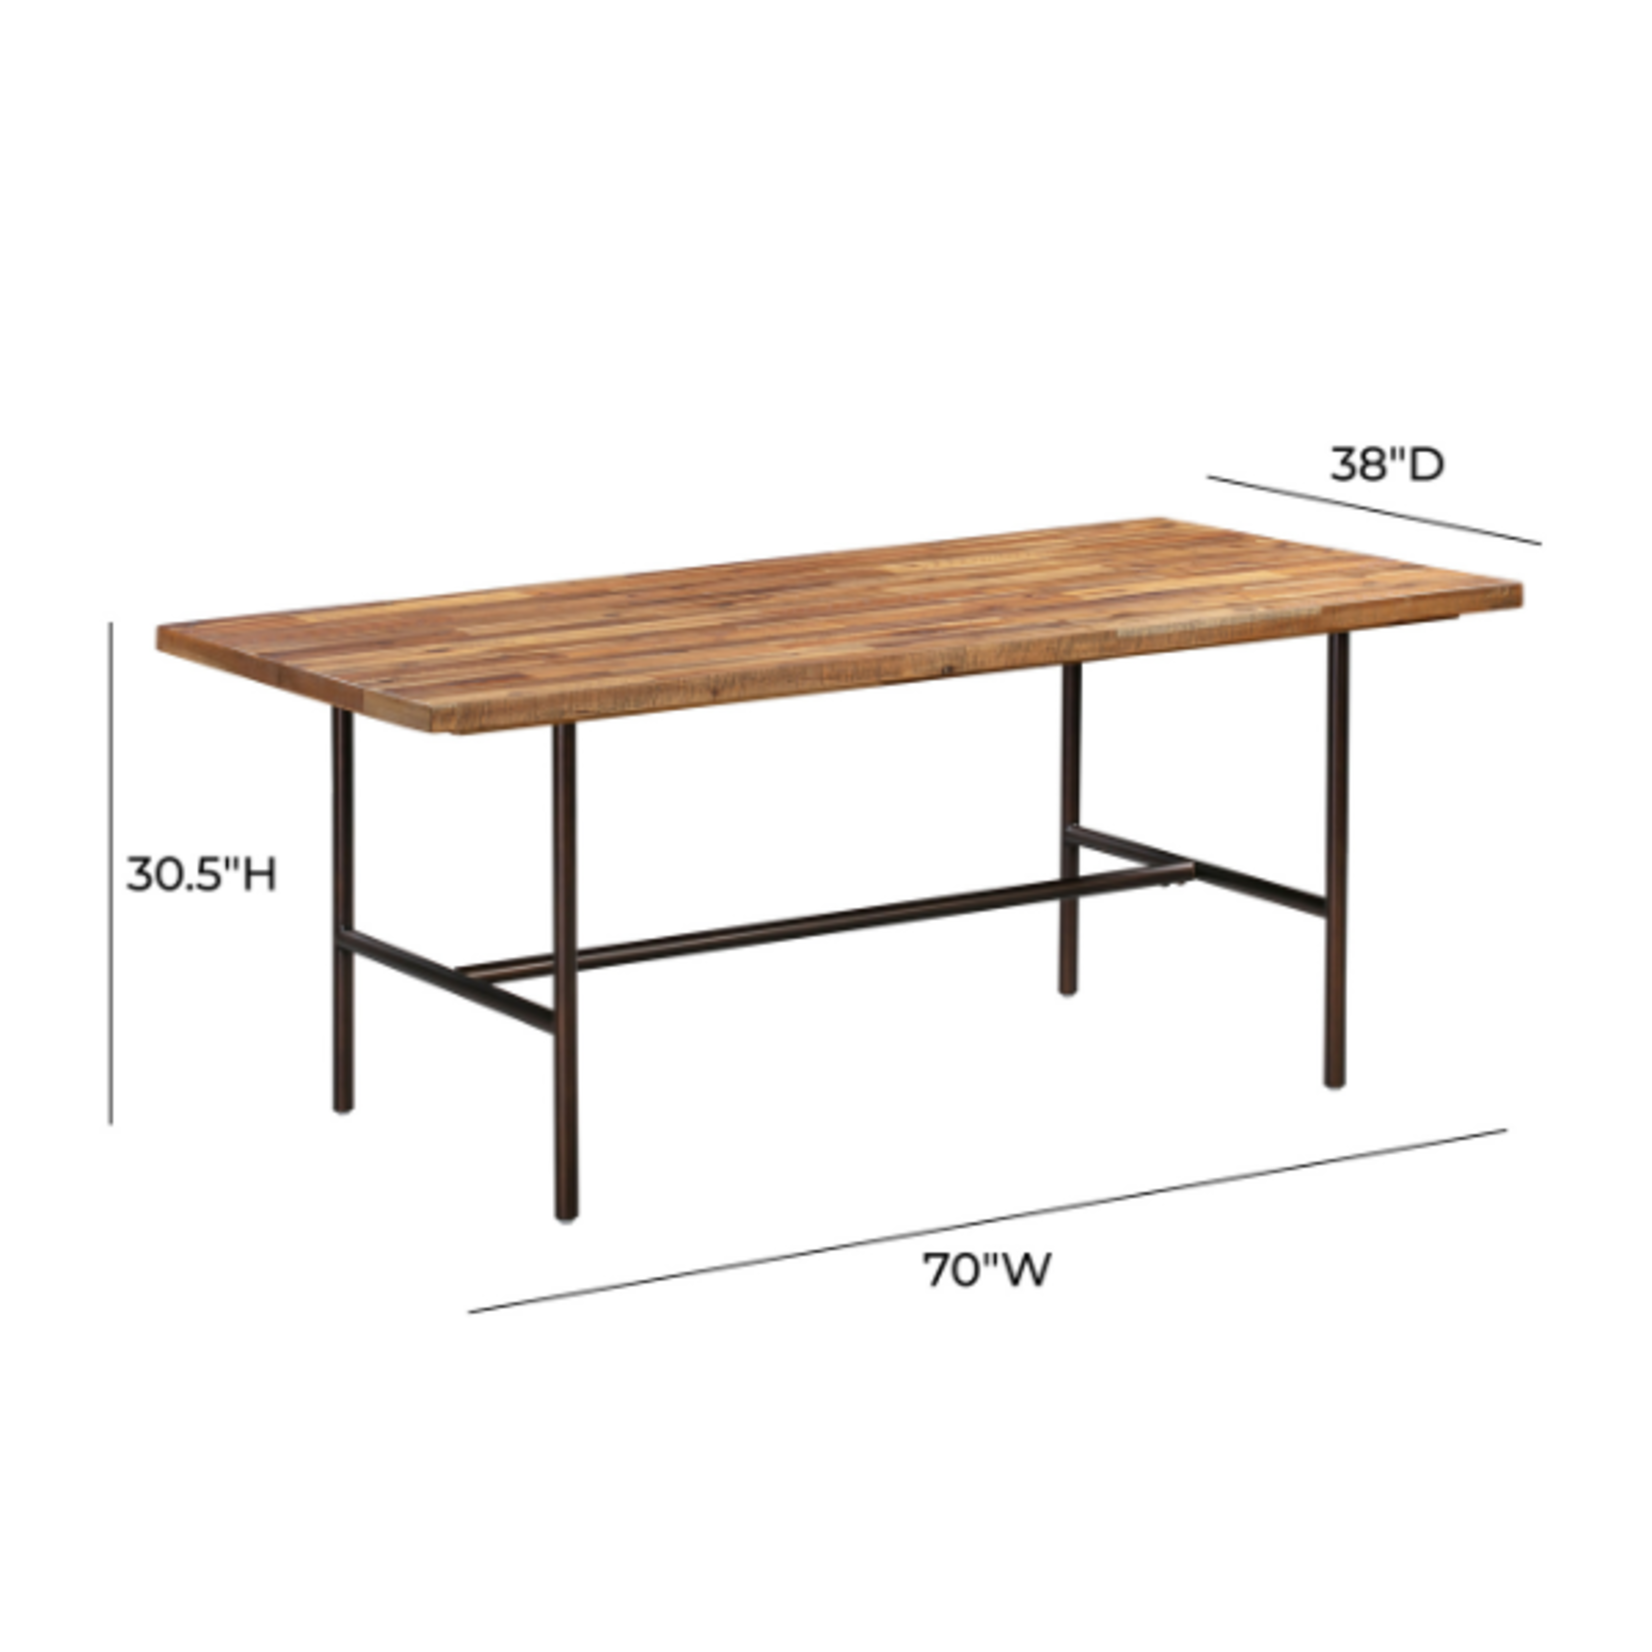 Tov Wick Wooden Dining Table 